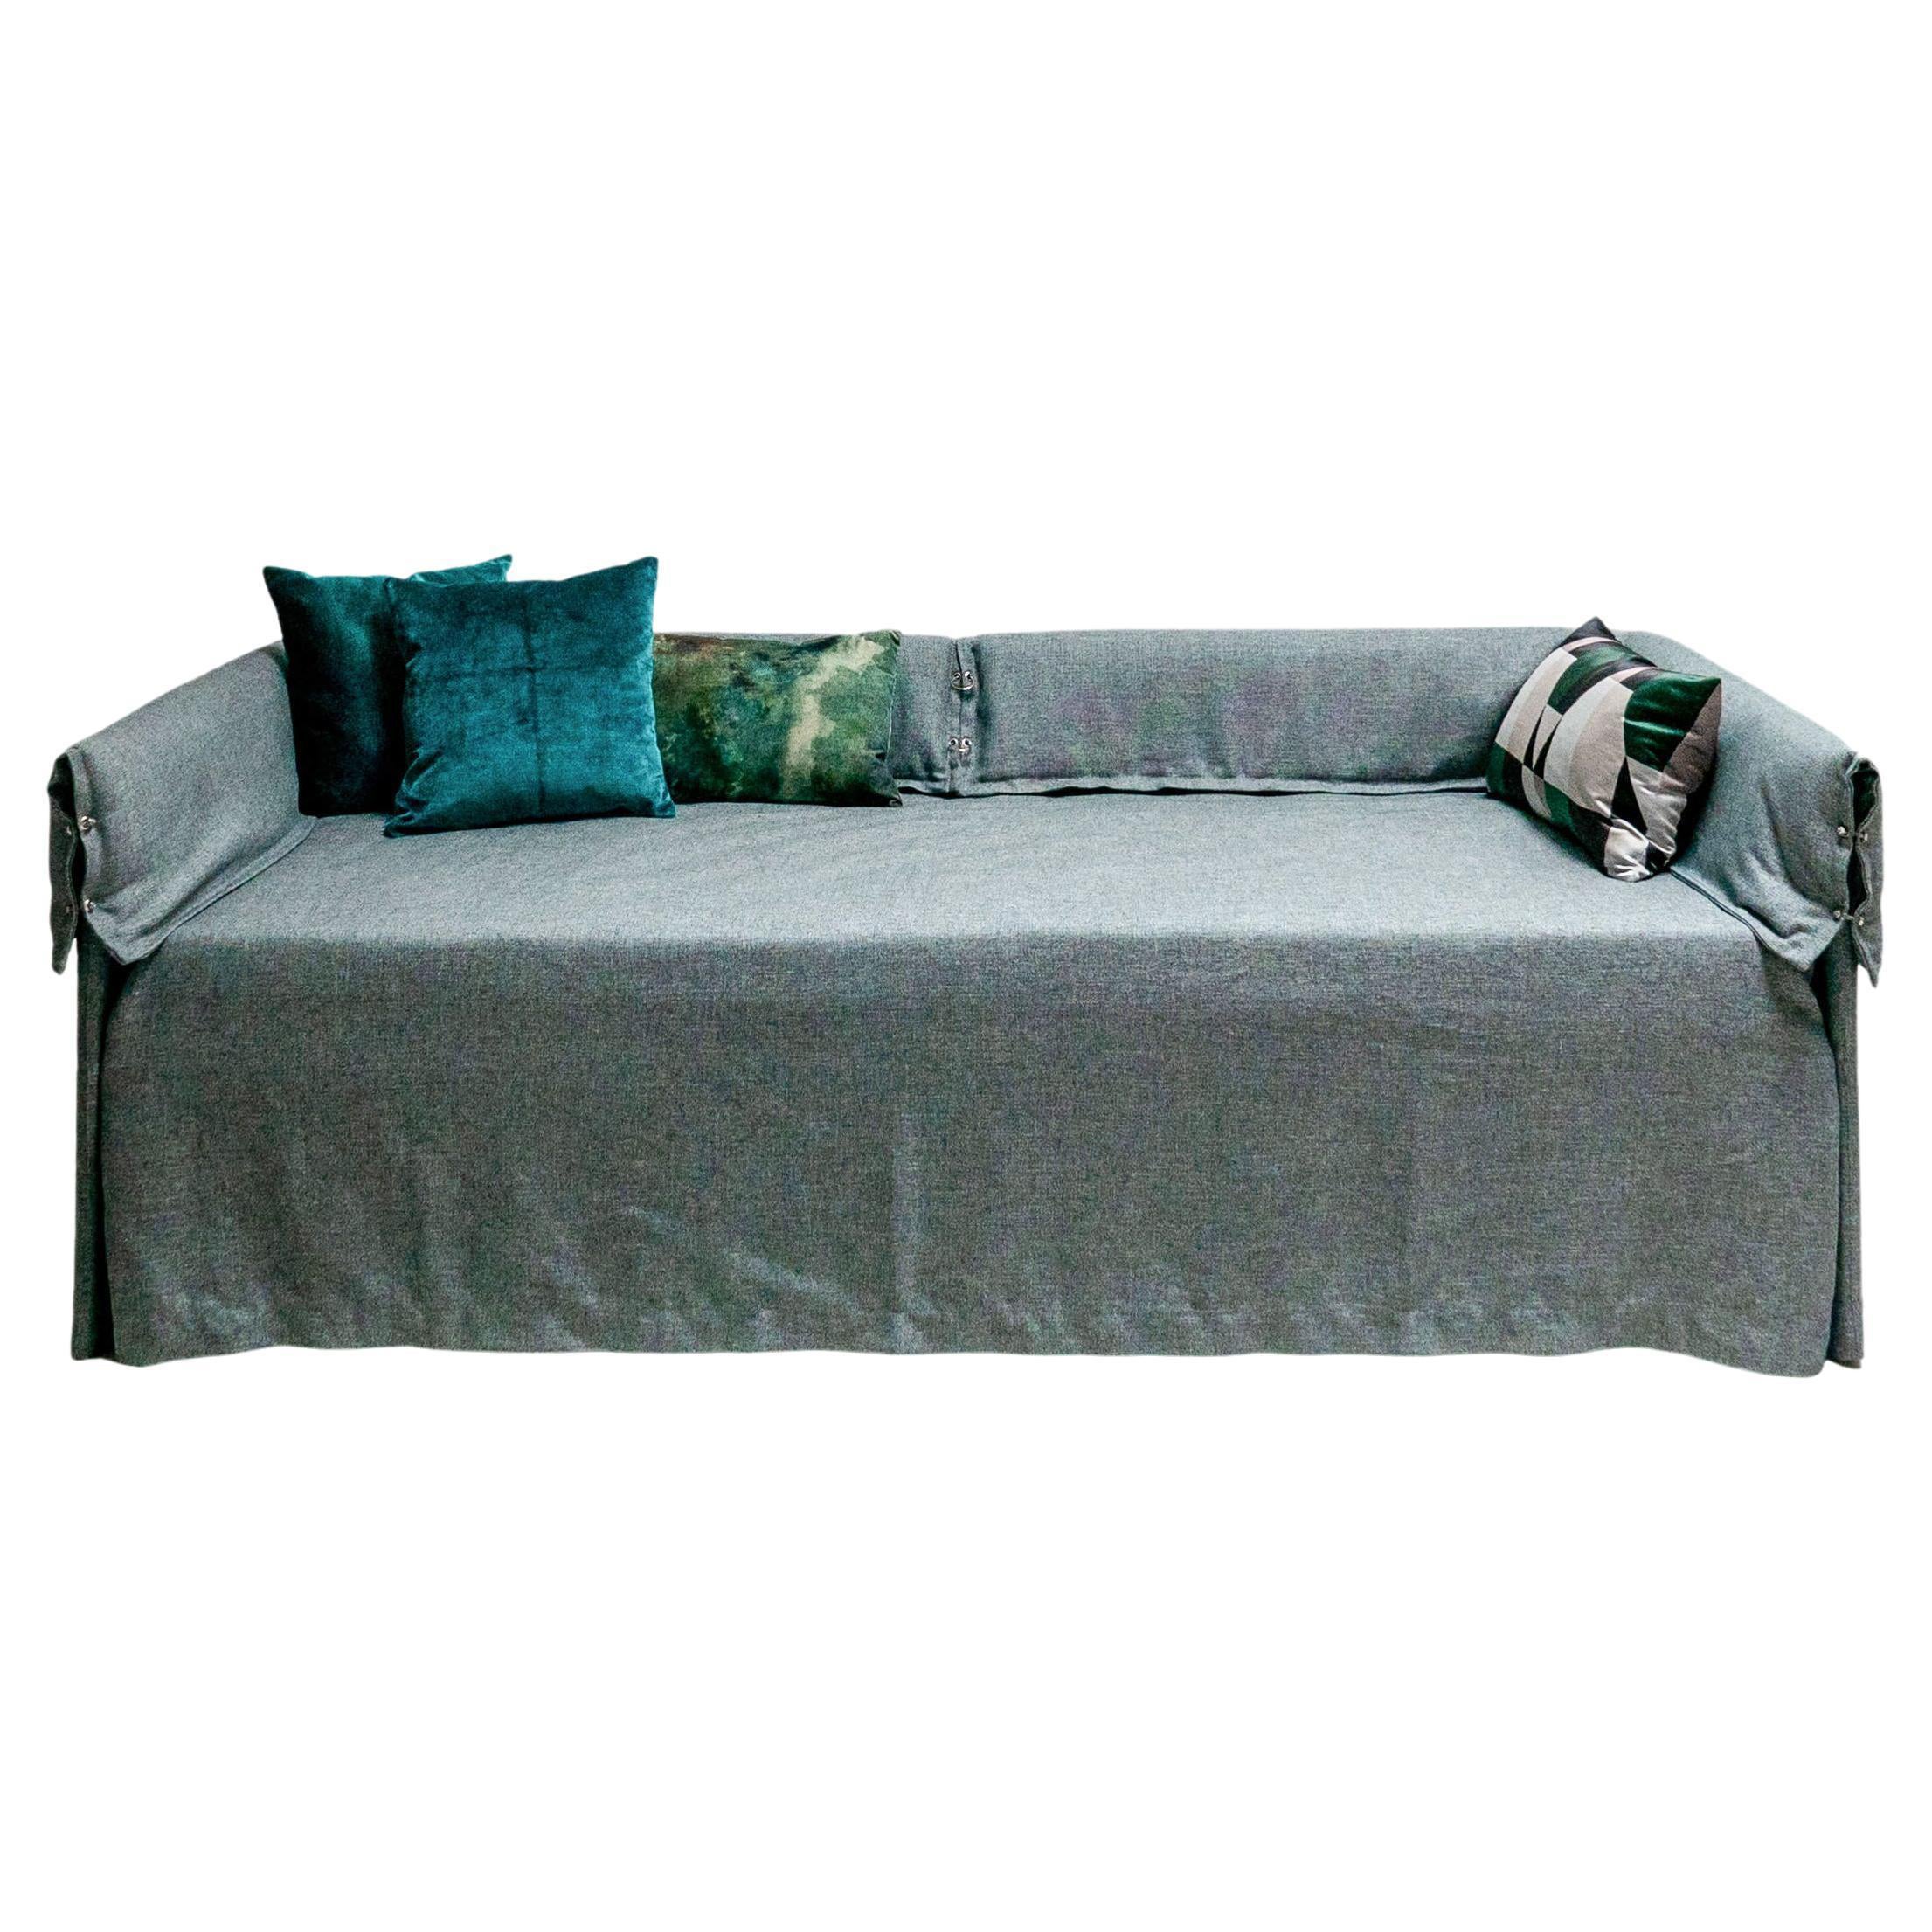 Contemporary Italian Sofa Bed by Spinzi, Green Fabric Upholstery, Bolts Details For Sale